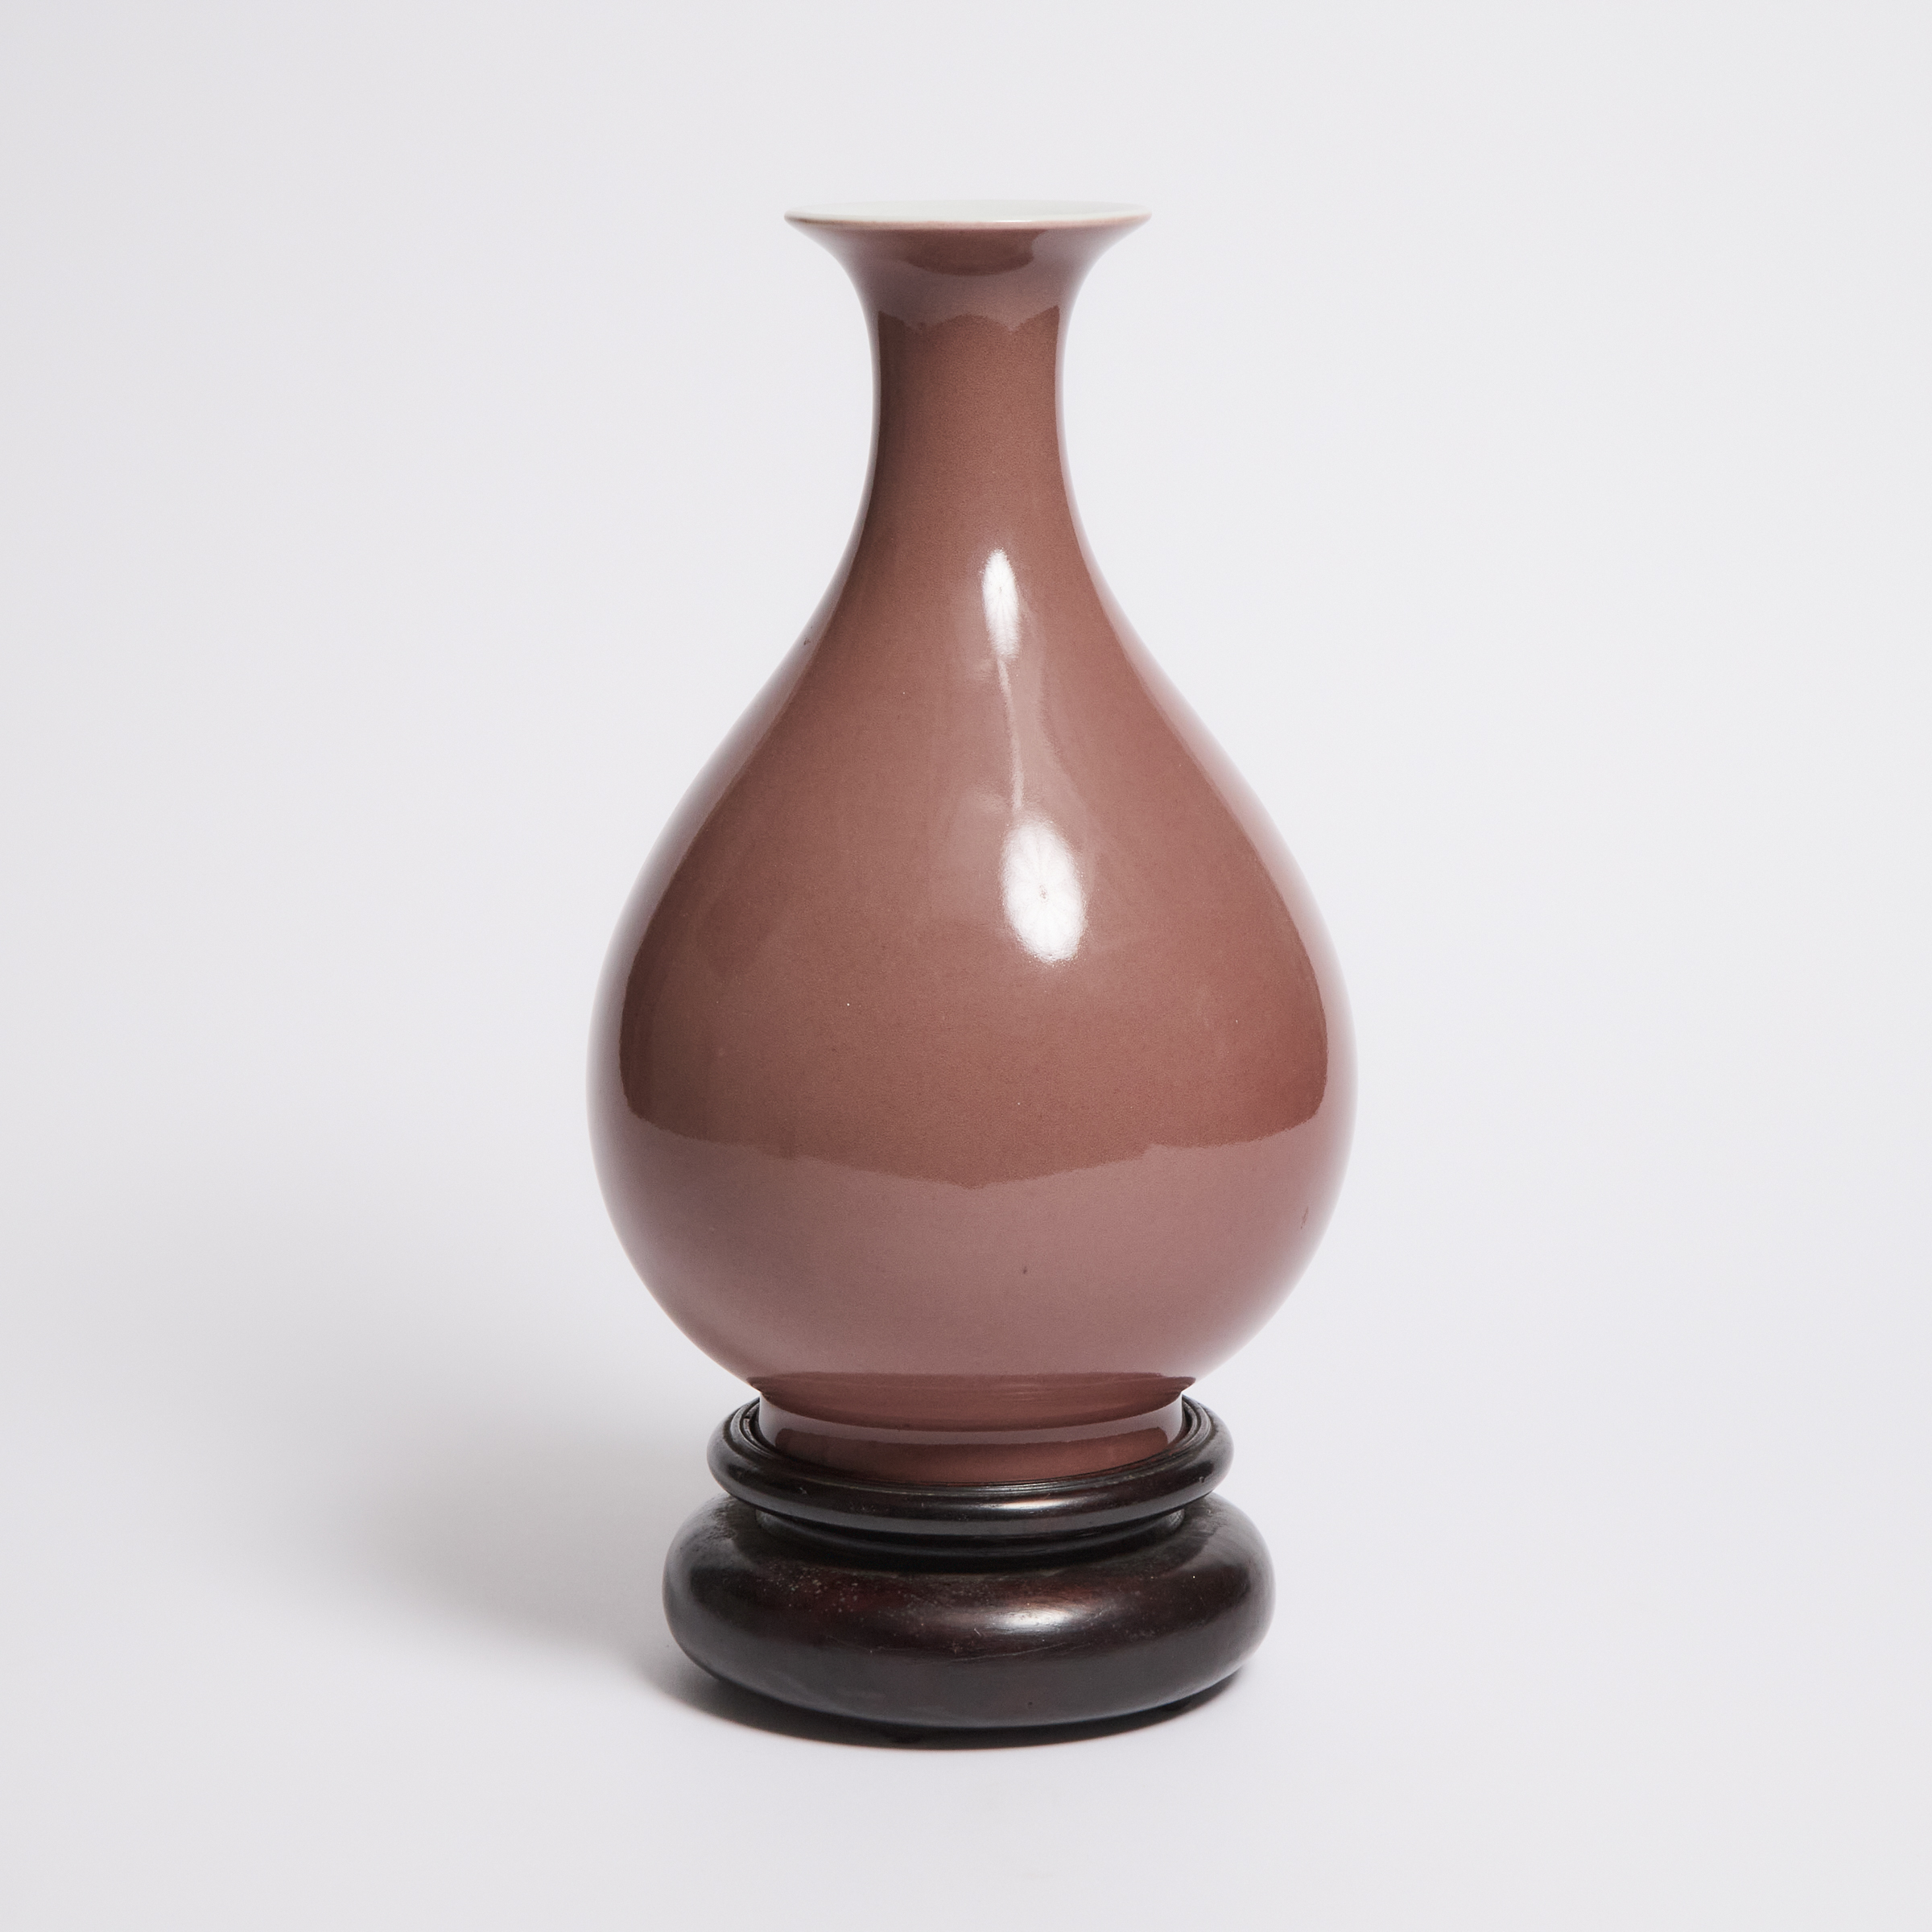 A Copper Red Pear Shaped Vase  2fb05b8